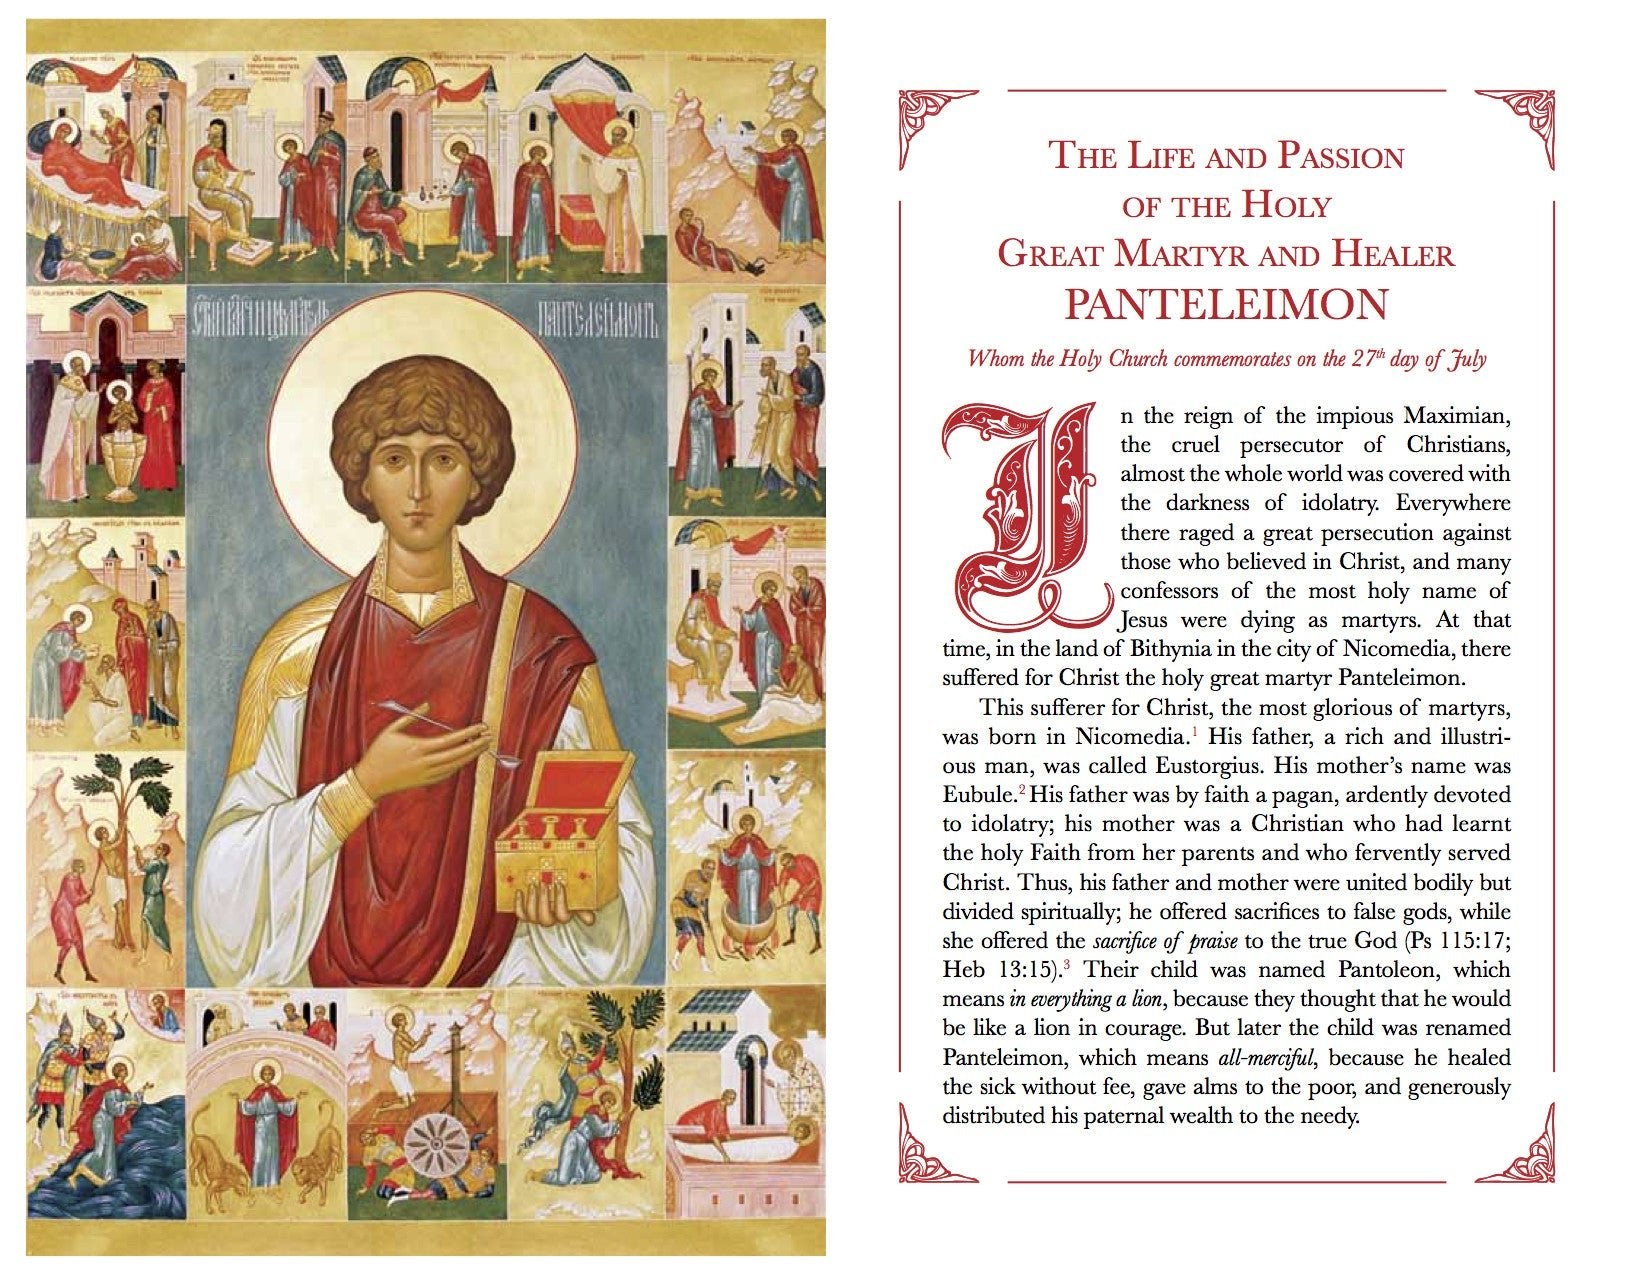 The Holy Great Martyr and Healer Panteleimon - His Life & Akathist - Holy Cross Monastery